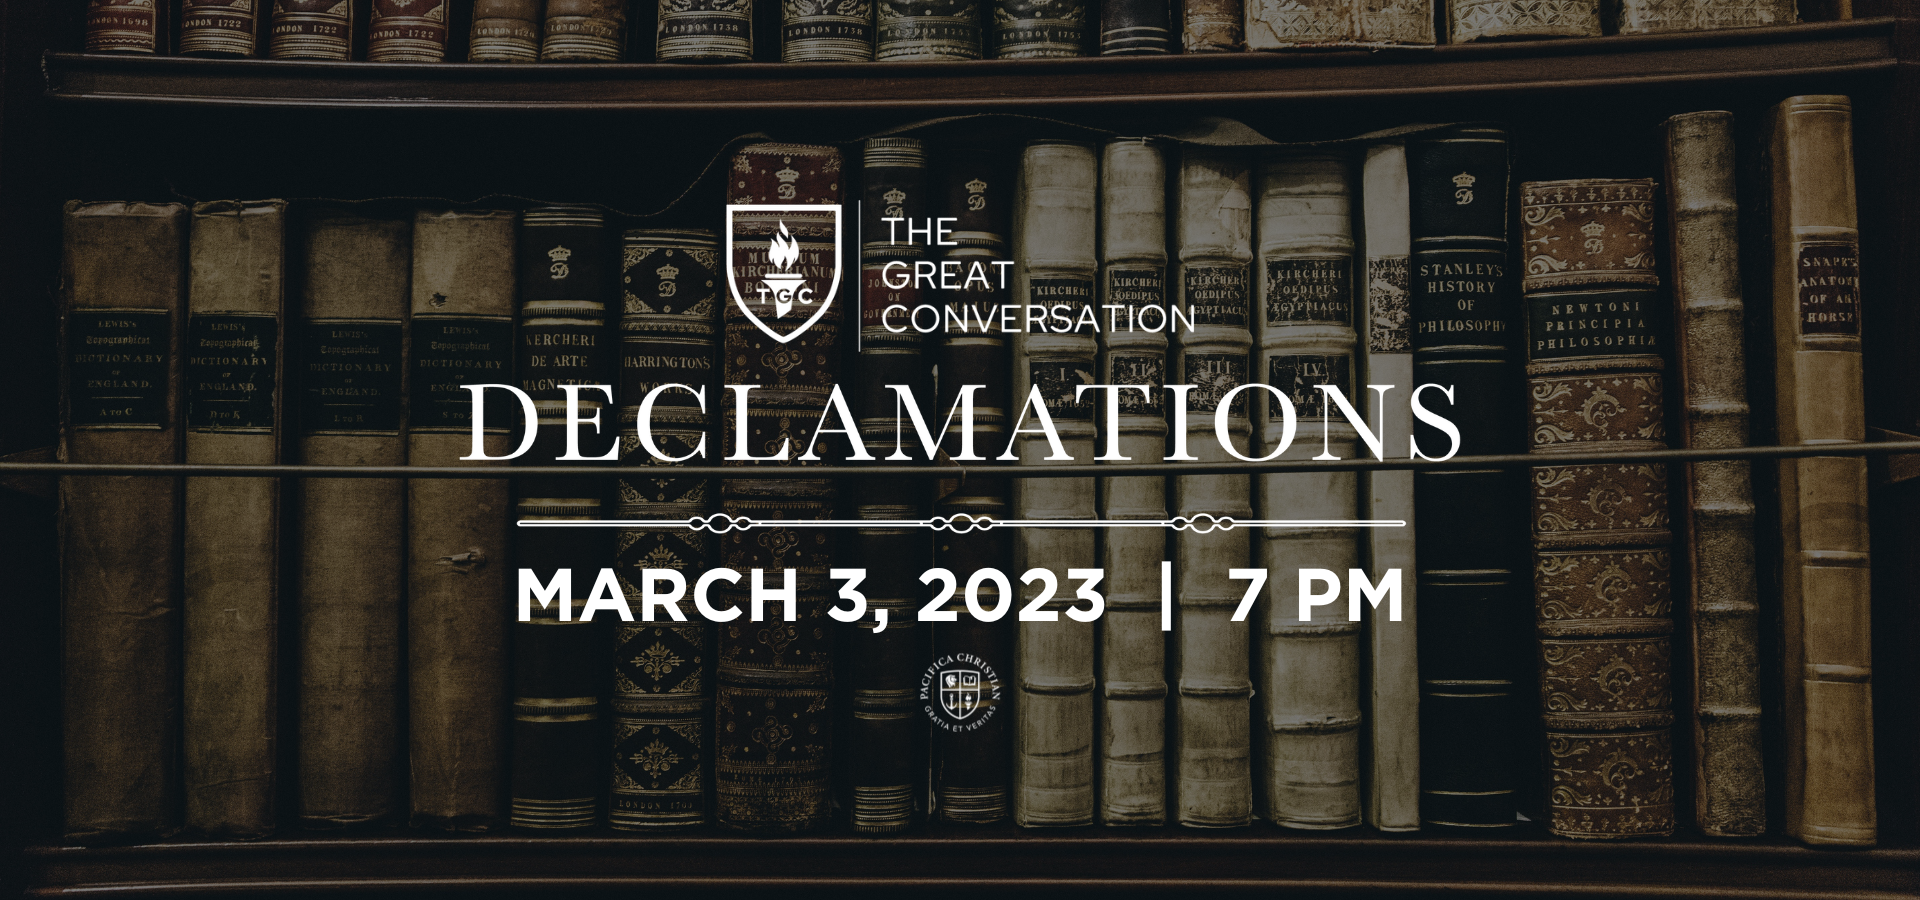 Annual Declamations Contest to Take Place on Friday, March 3